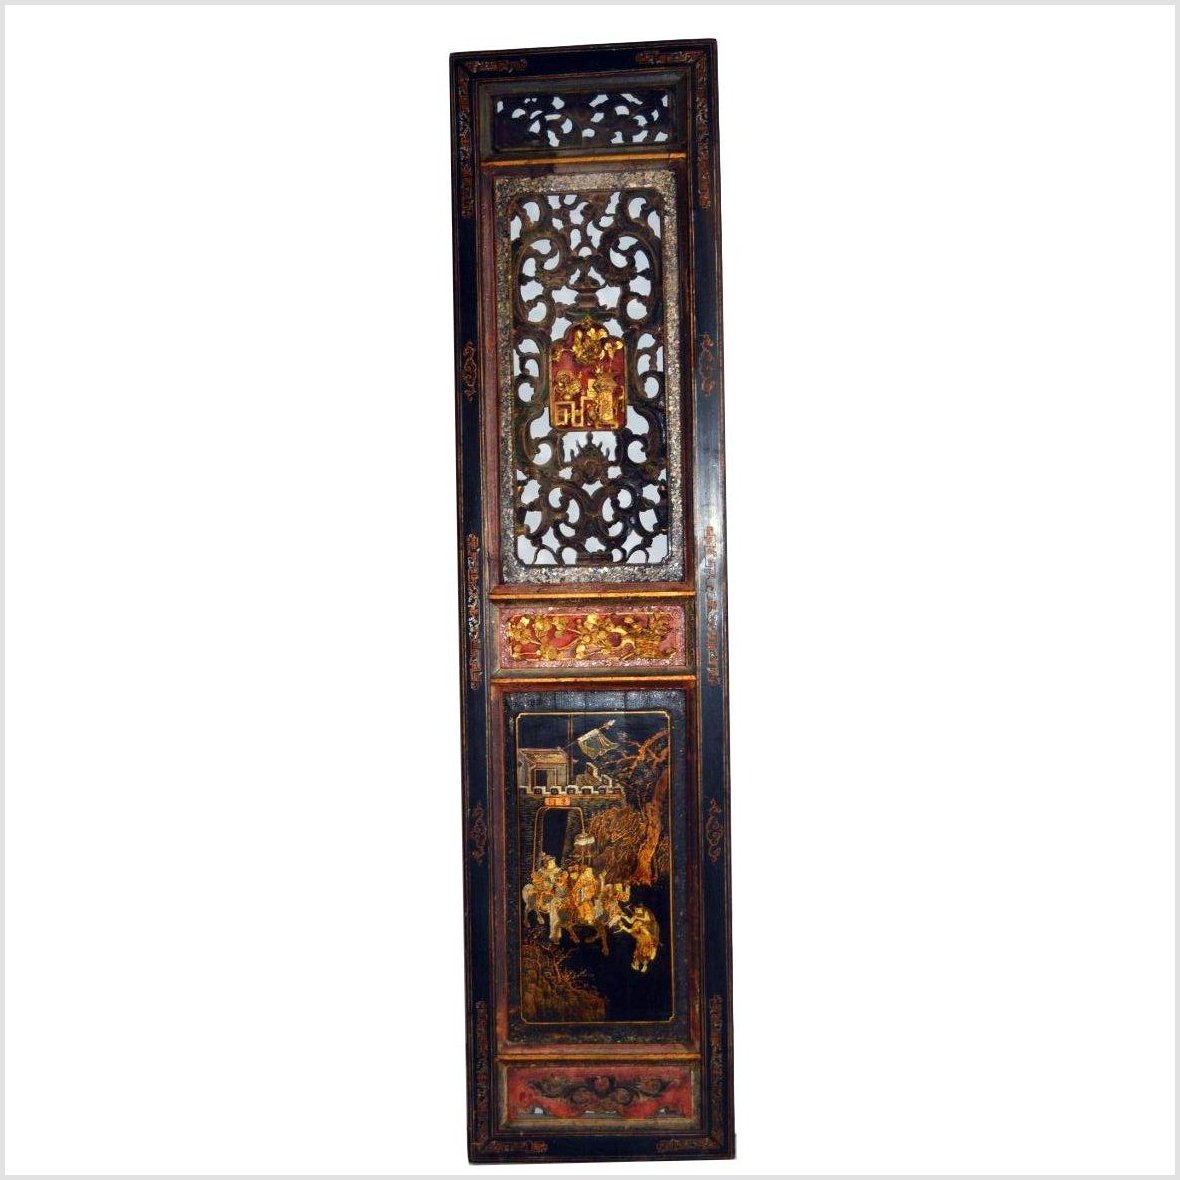 Antique Chinese Hand-Carved Wall Ornament- Asian Antiques, Vintage Home Decor & Chinese Furniture - FEA Home